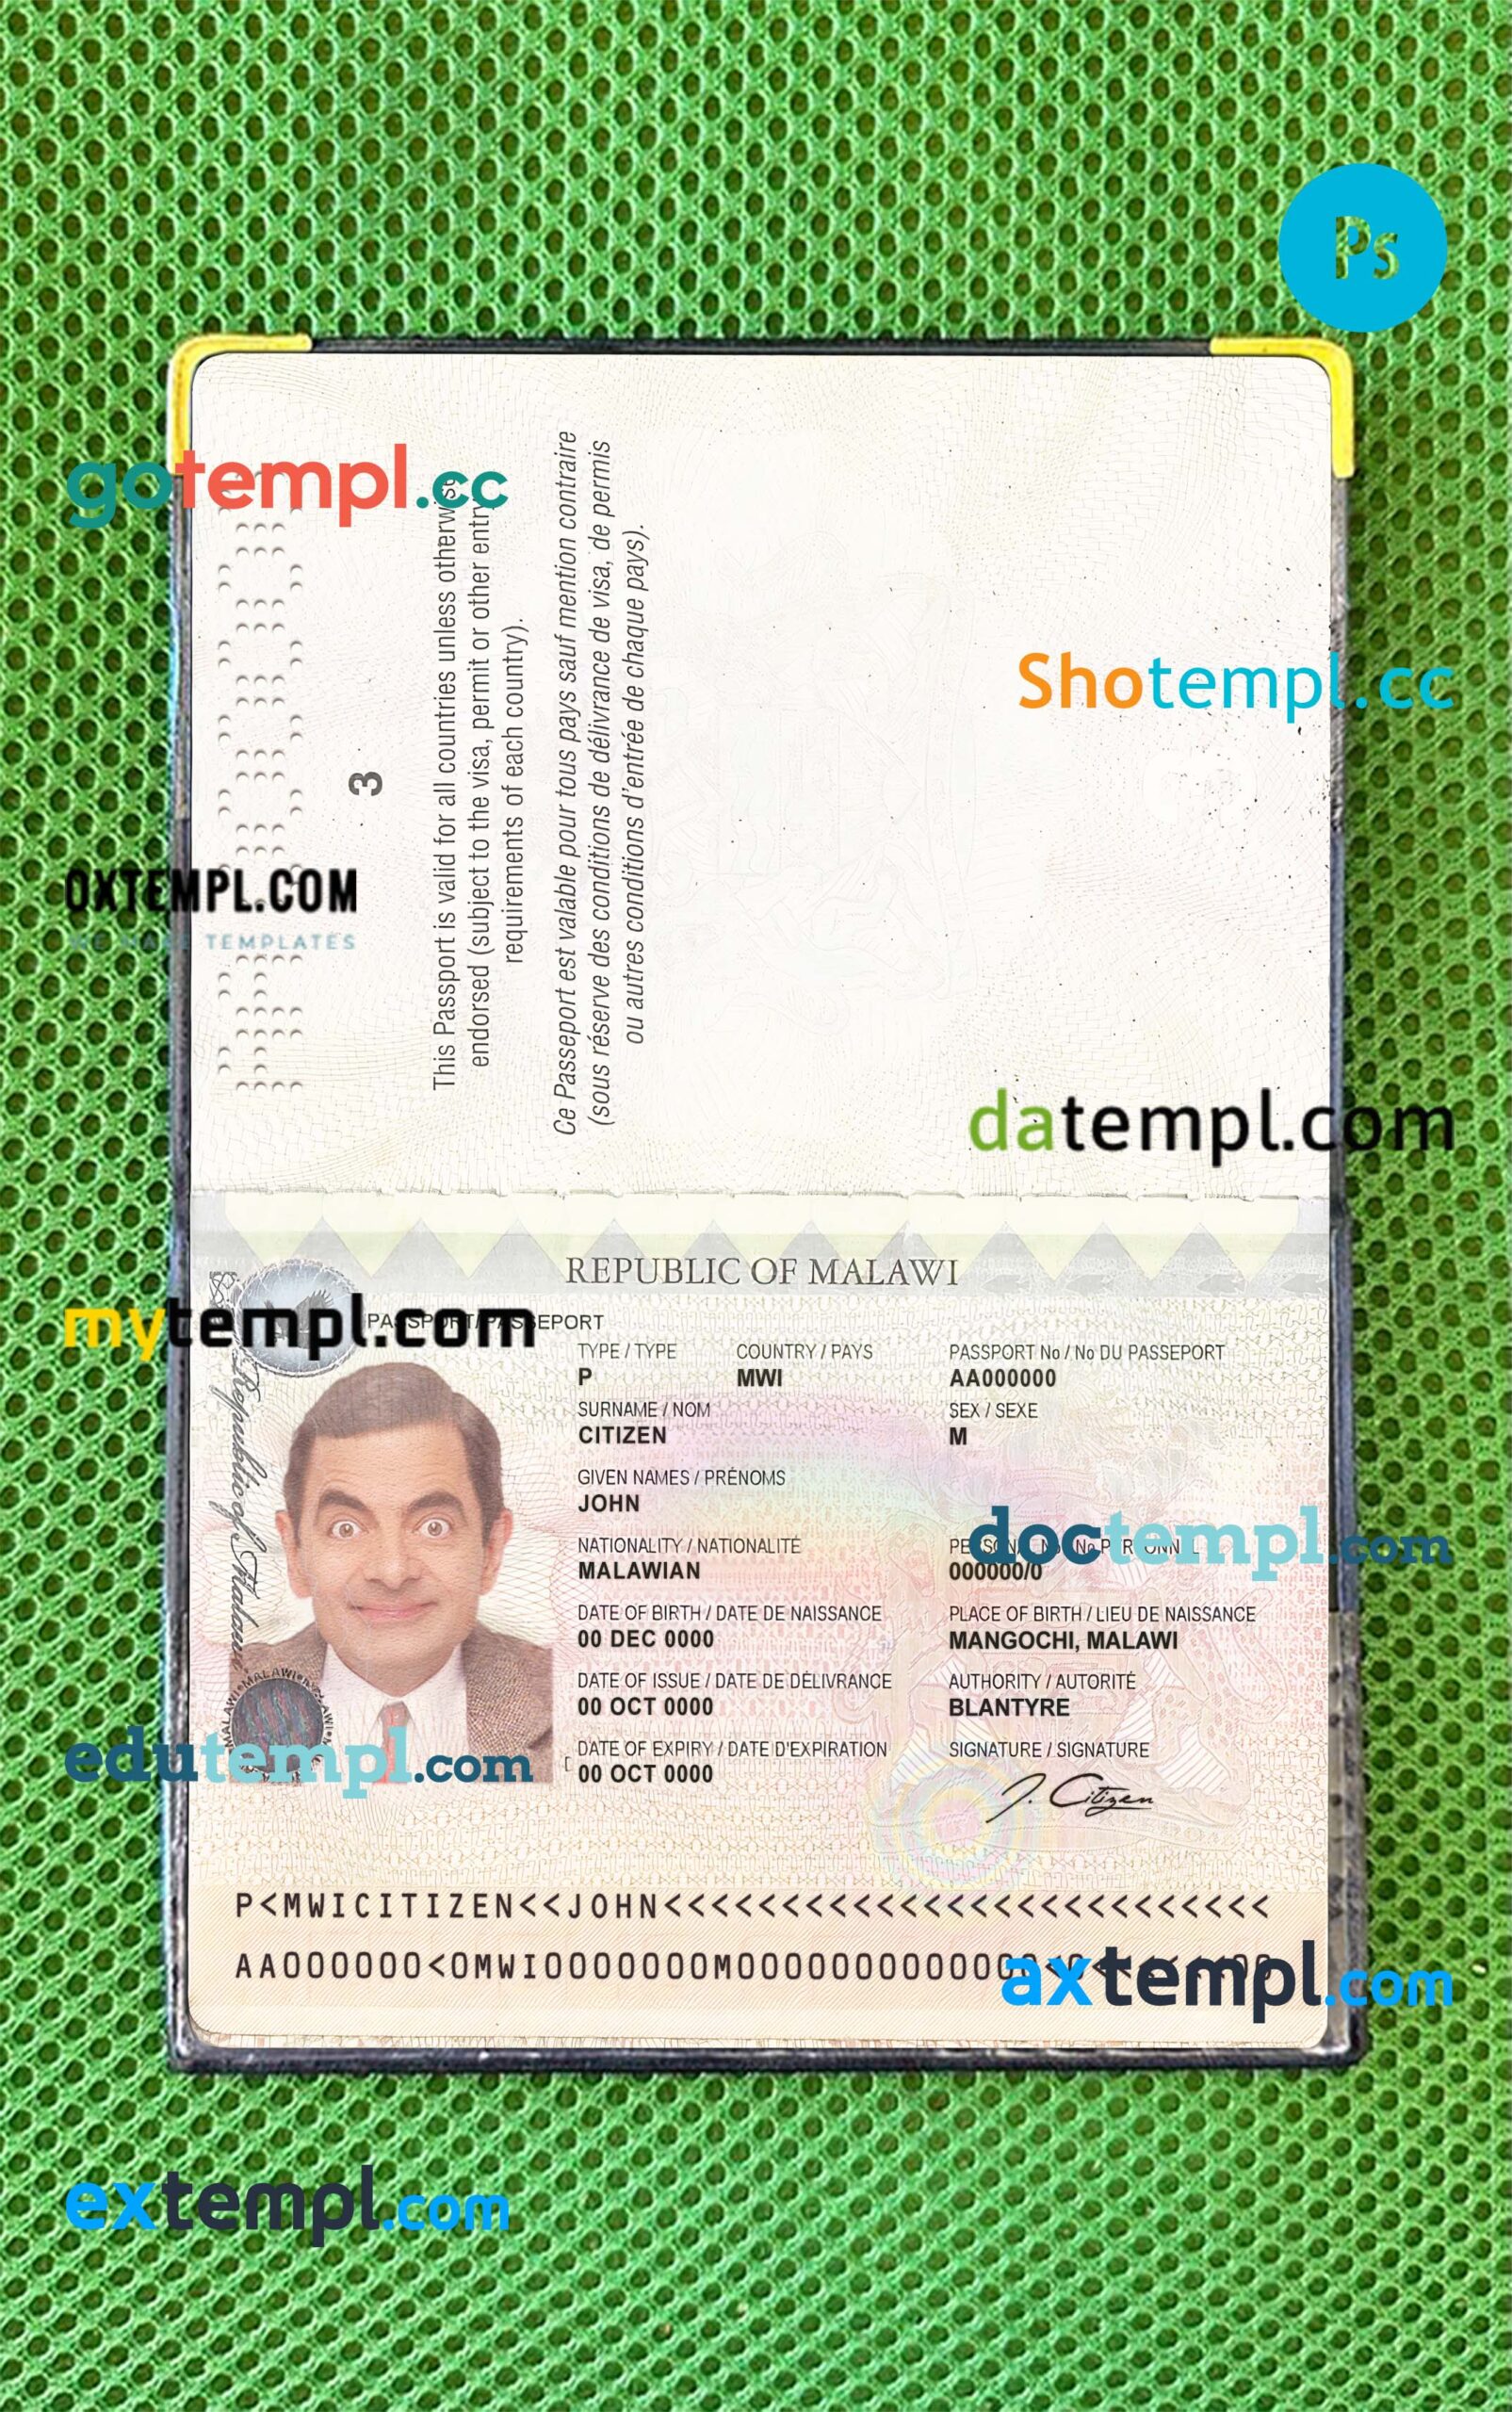 Slovakia passport editable PSD files, scan and photo-realistic look (2012), 2 in 1